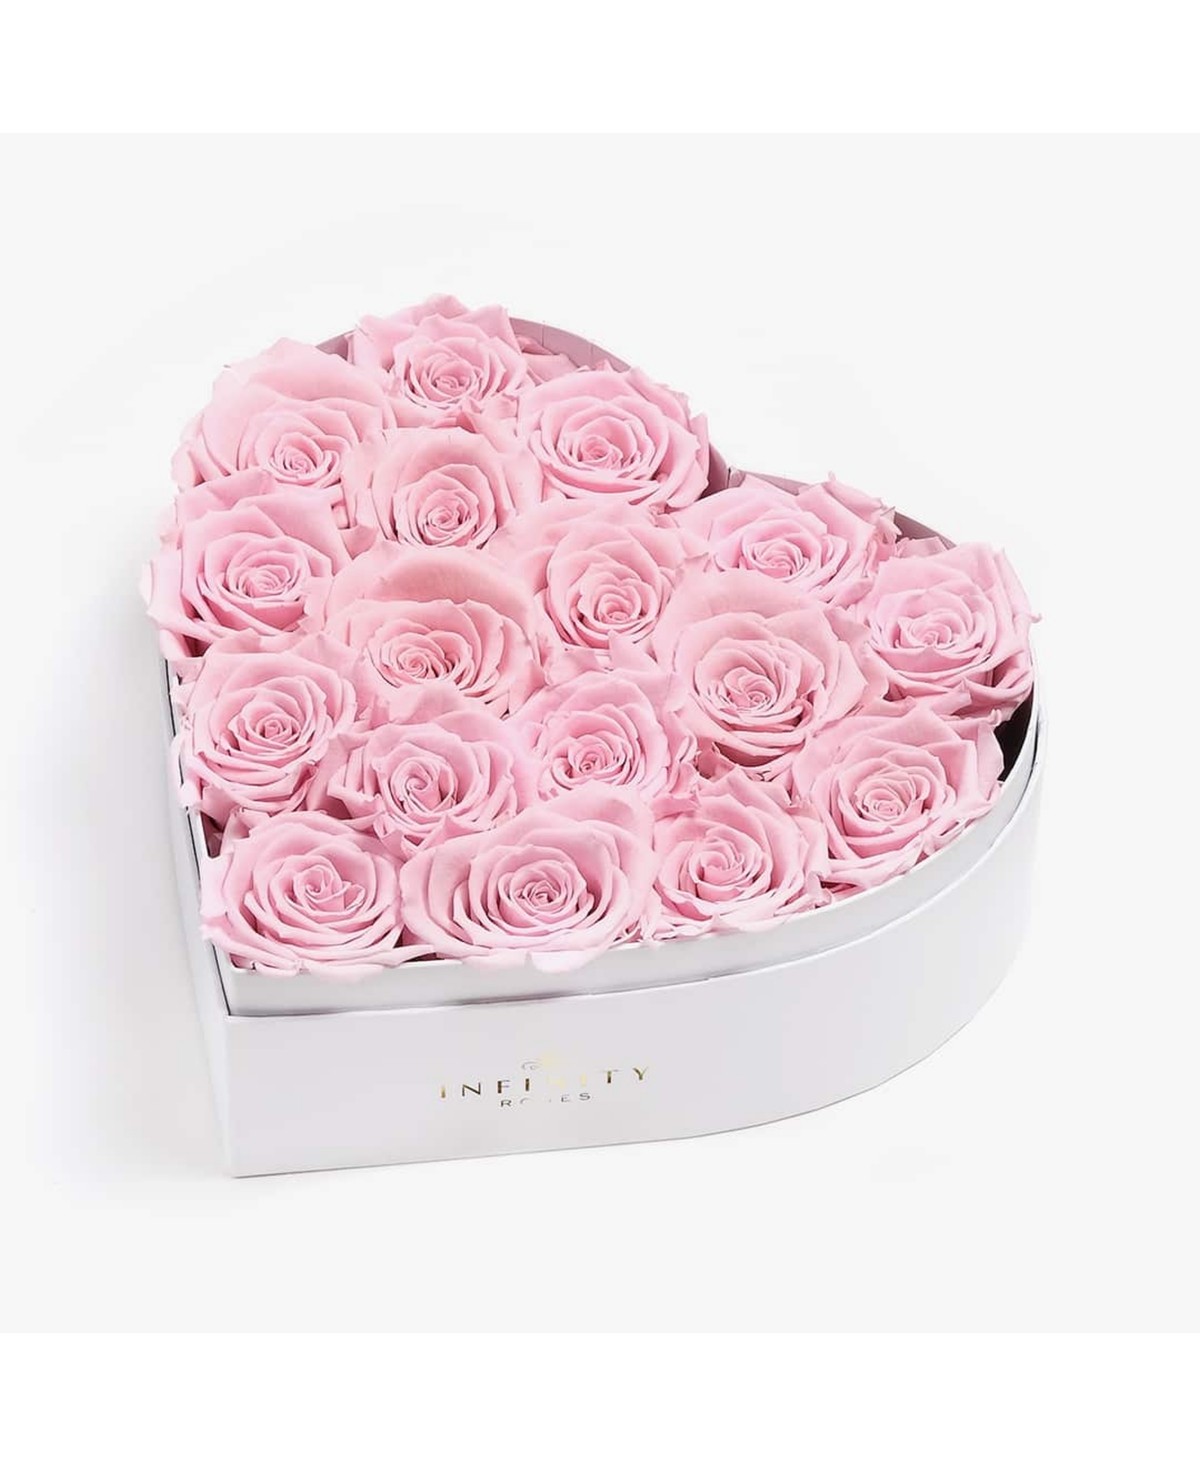 Heart Box of 17 Pink Real Roses Preserved to Last Over a Year - Pink